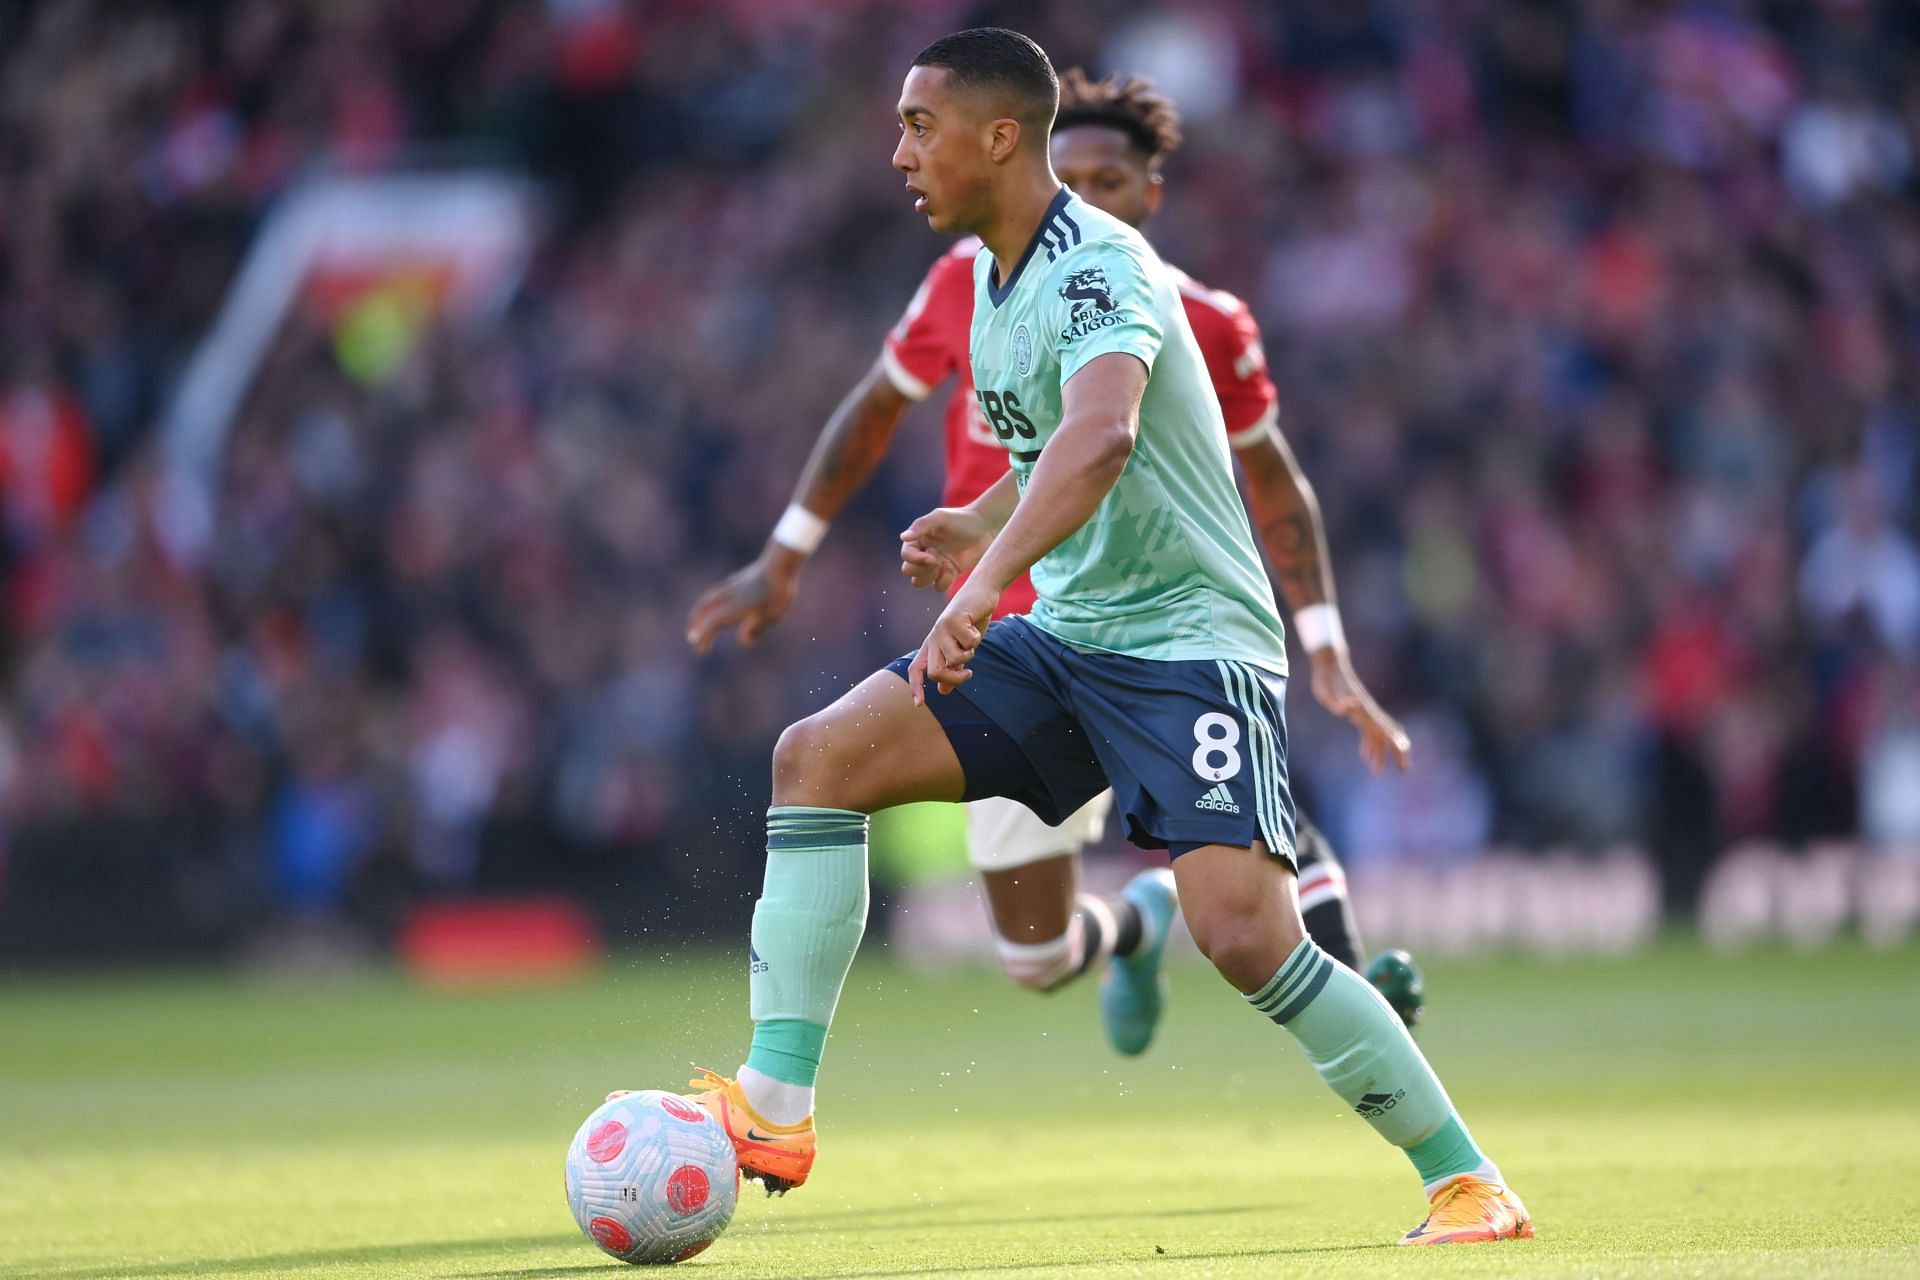 Youri Tielemans is likely to move this summer.